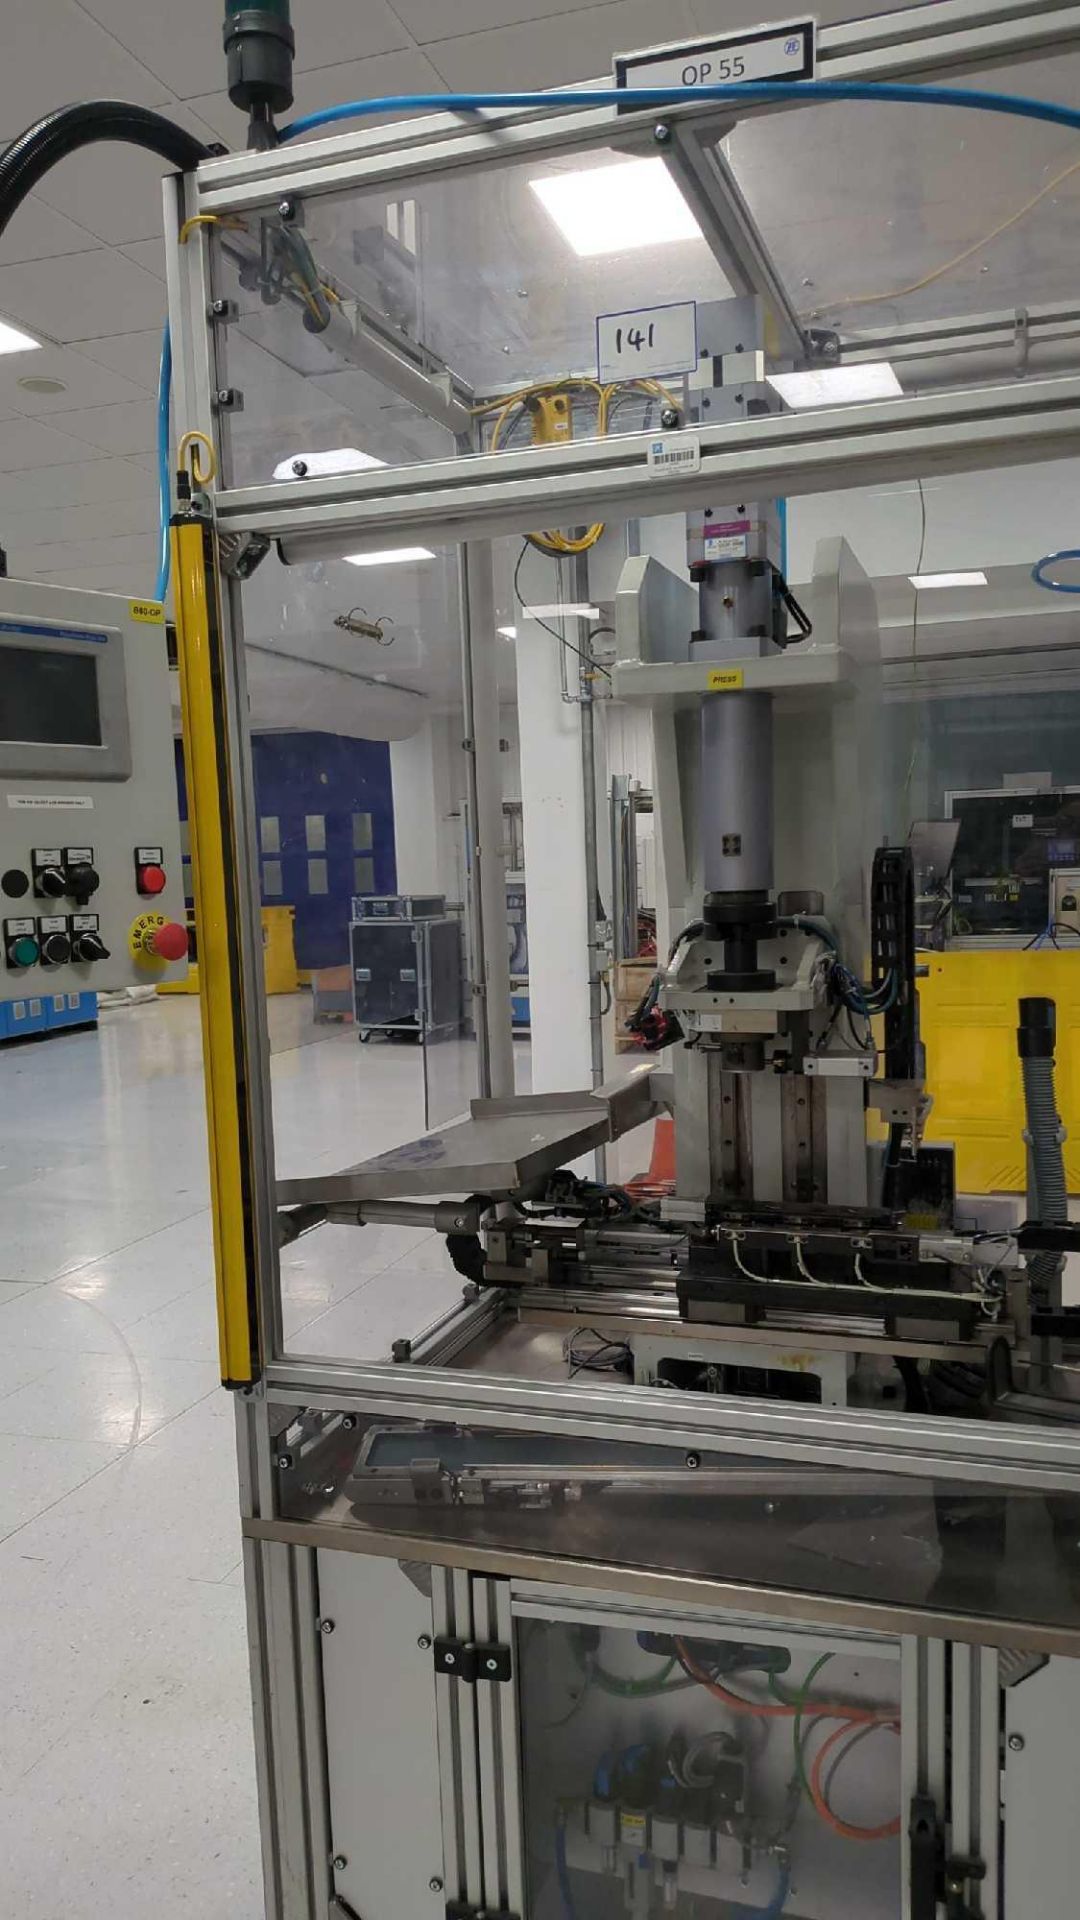 Rotor assembly cellMagnet robot insertion, press, glue dispense and cure Keyence Laser marking